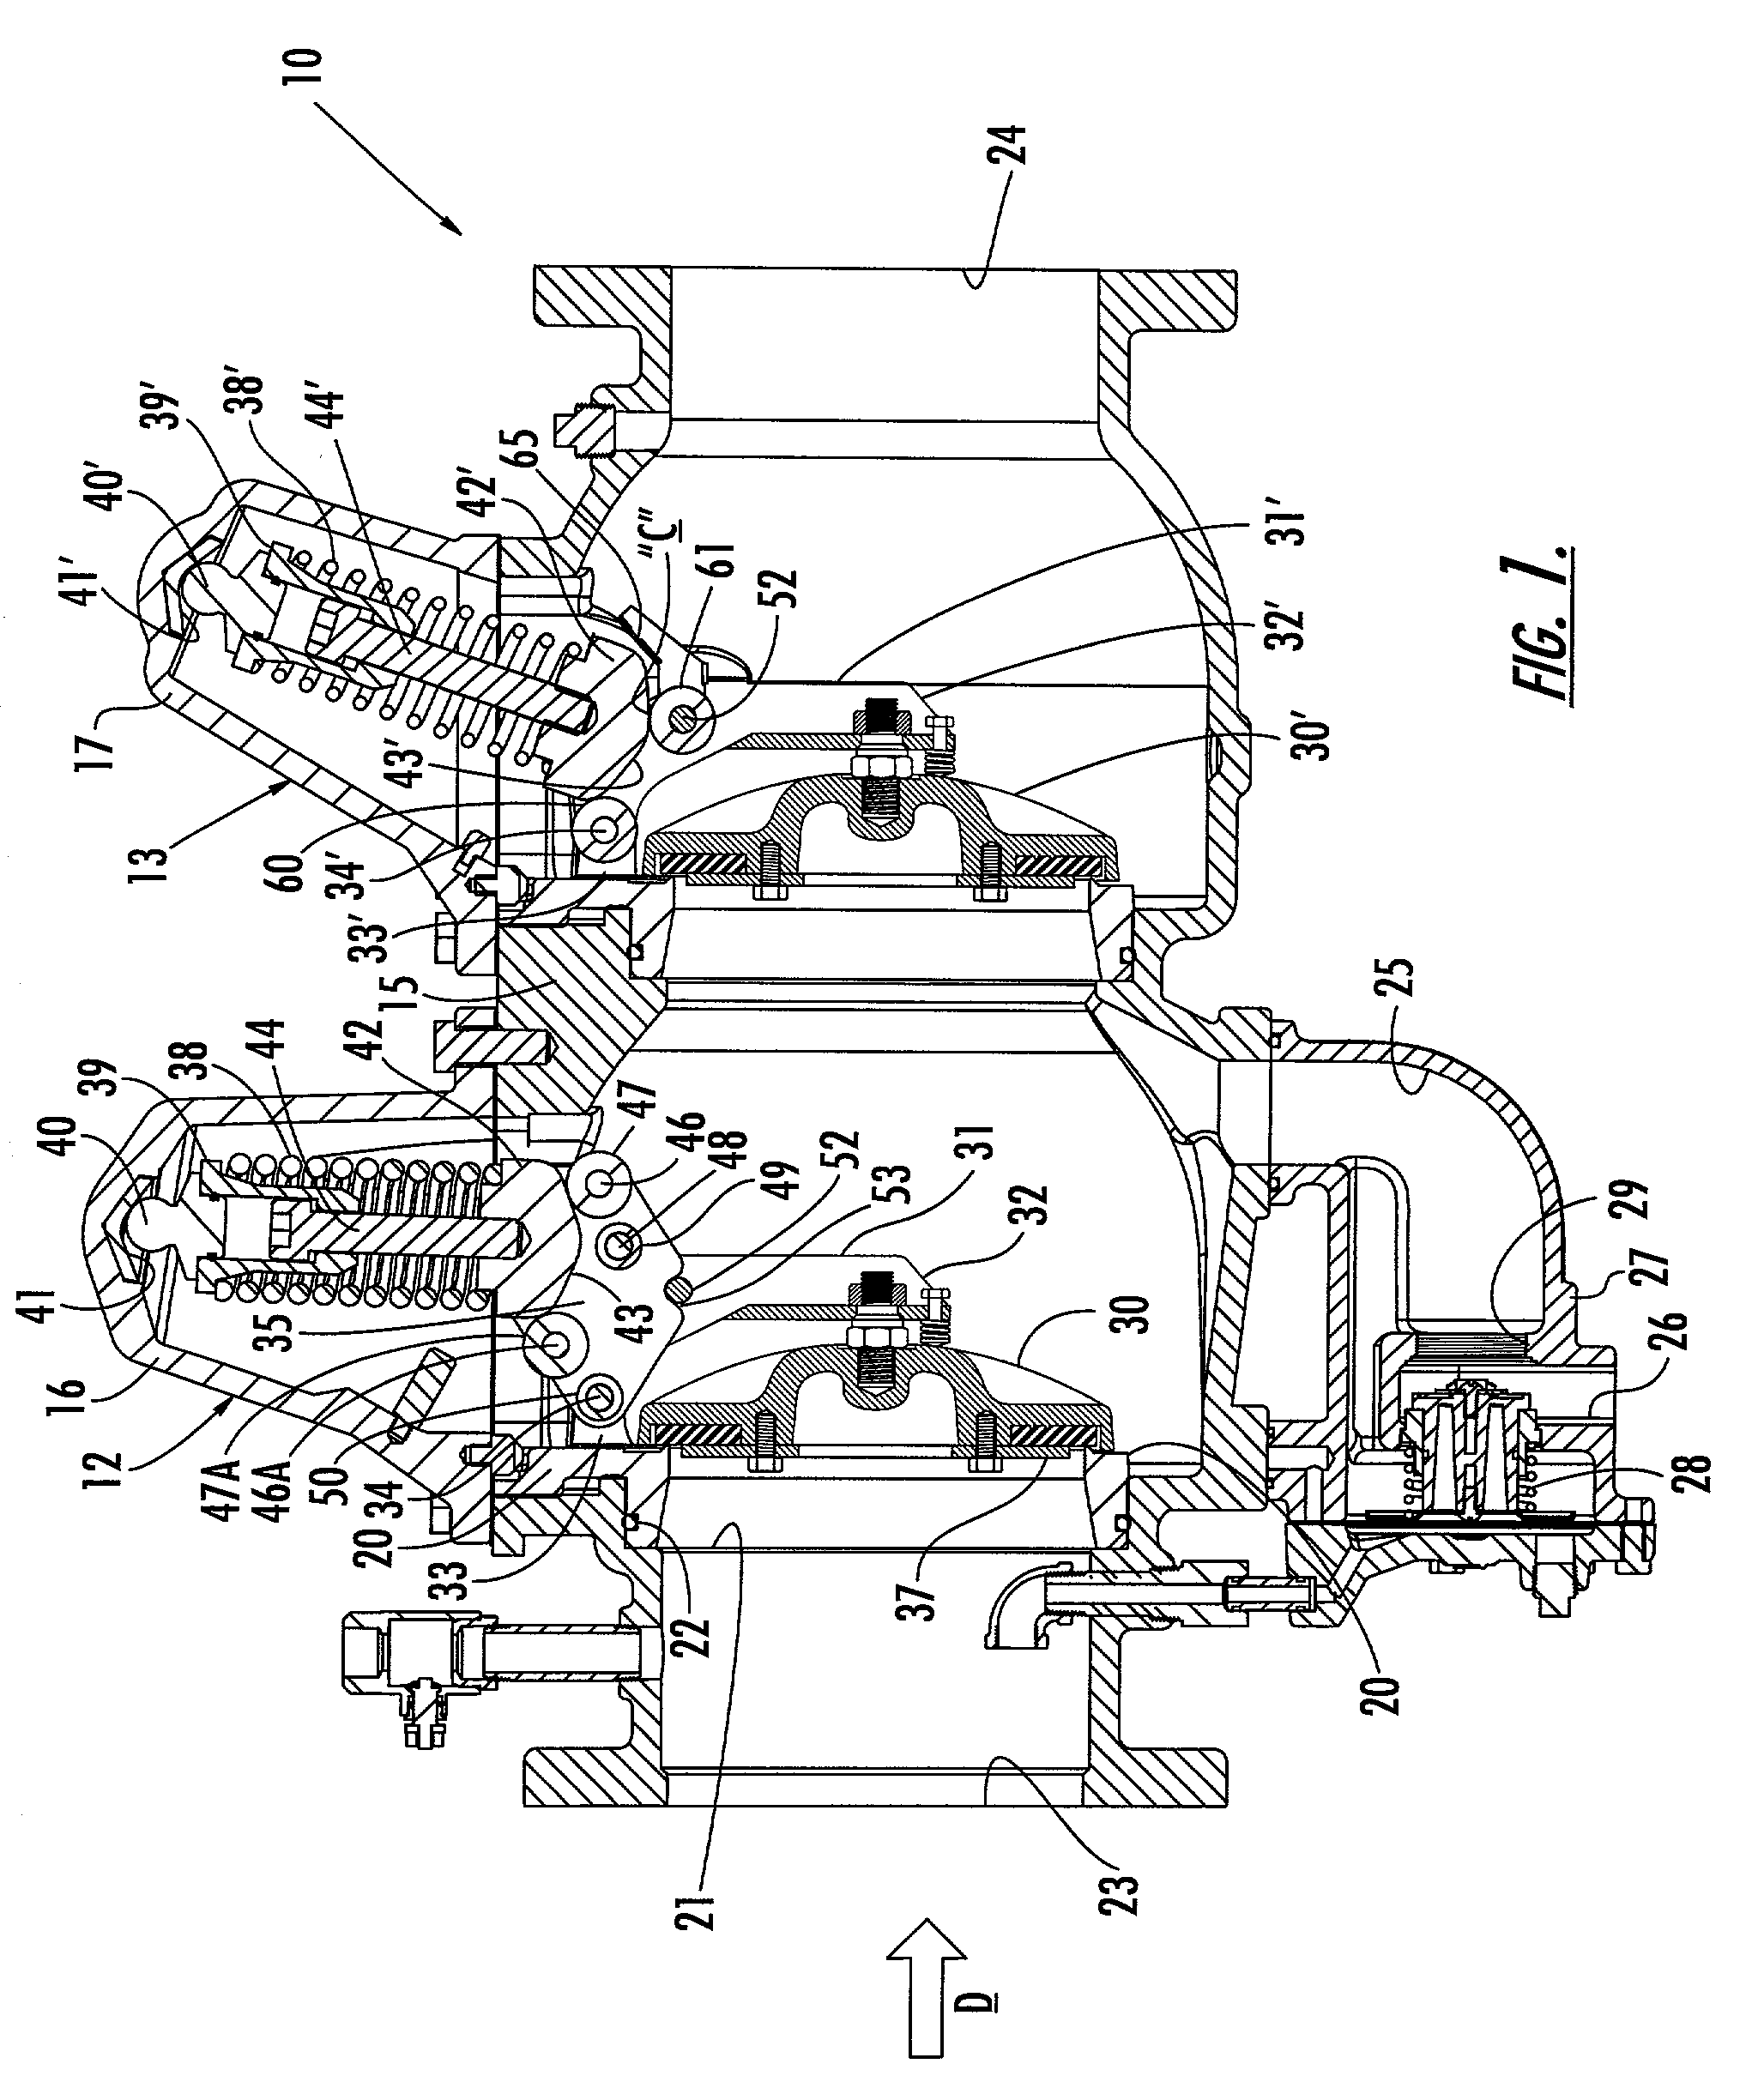 Swing check backflow preventer having check valve with lever arm